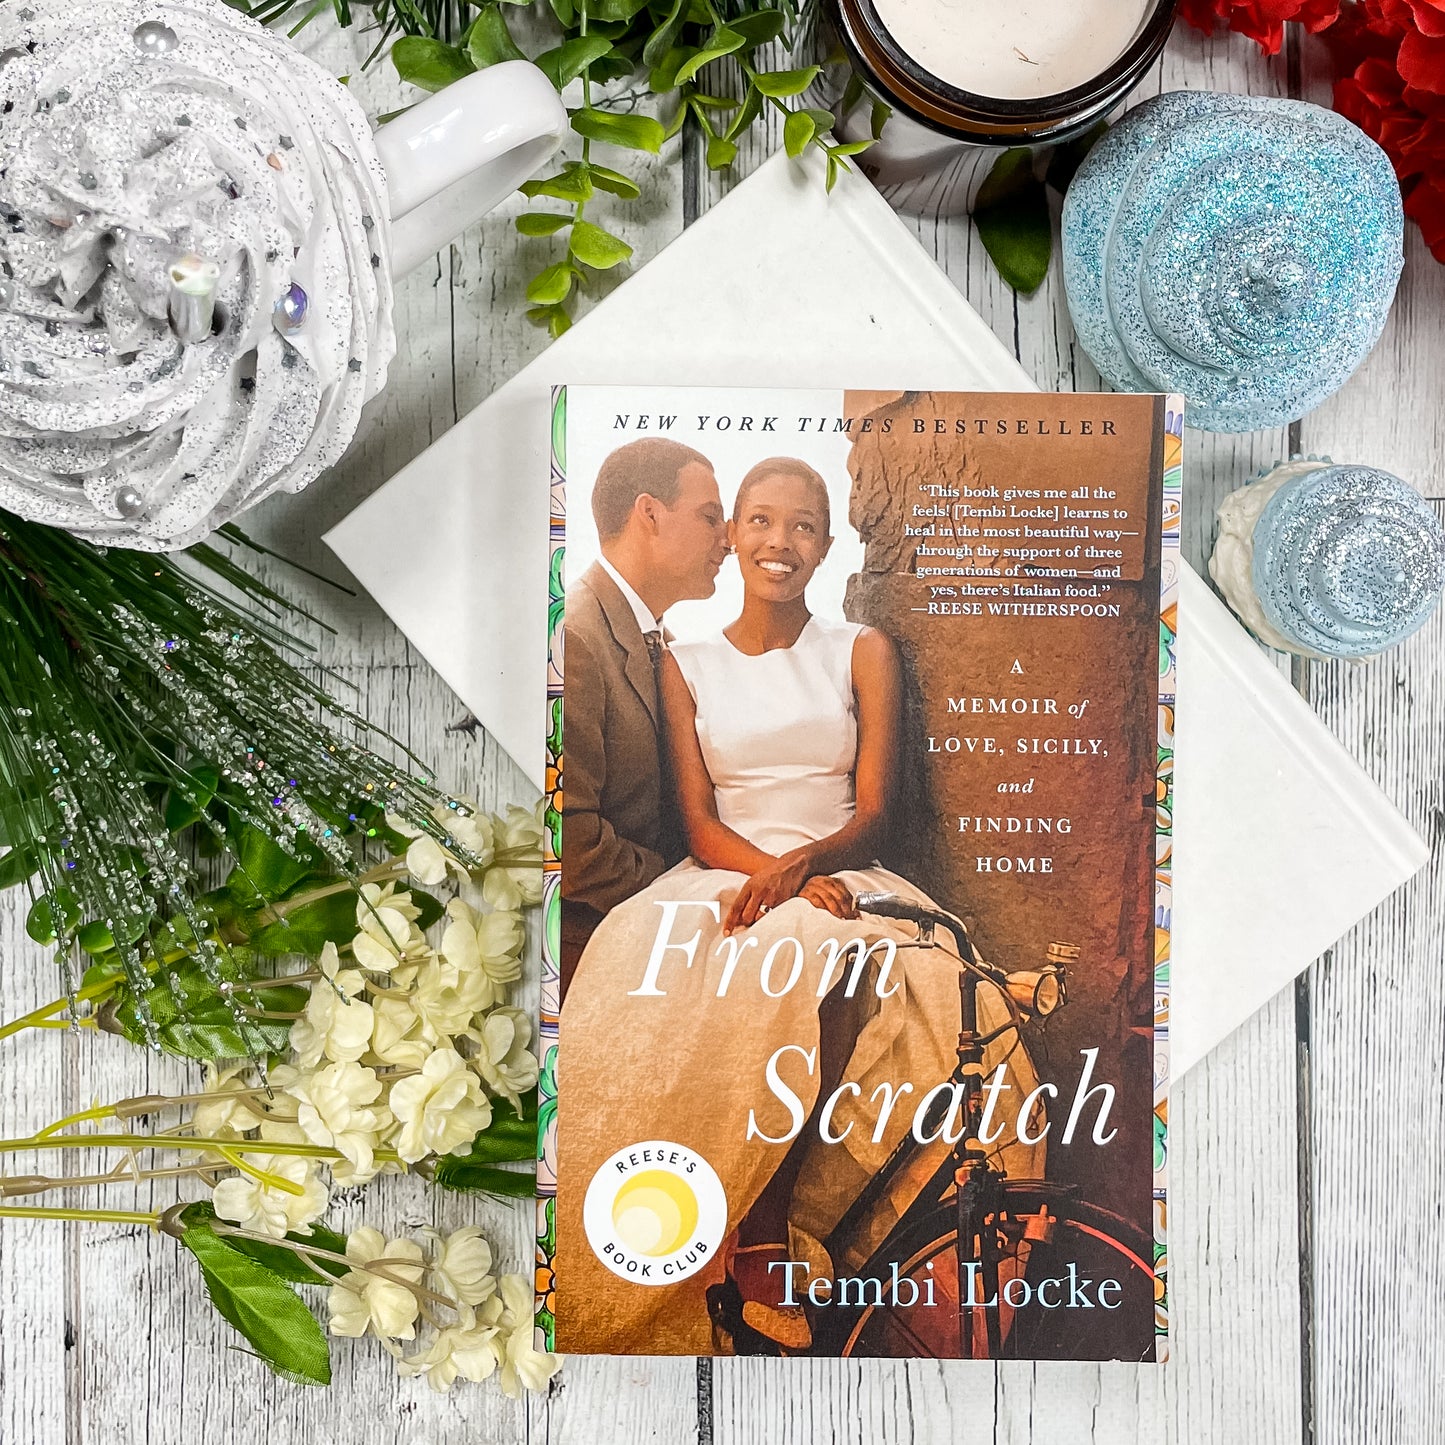 From Scratch: a Memoir of Love, Sicily, and Finding Home by Tembi Locke